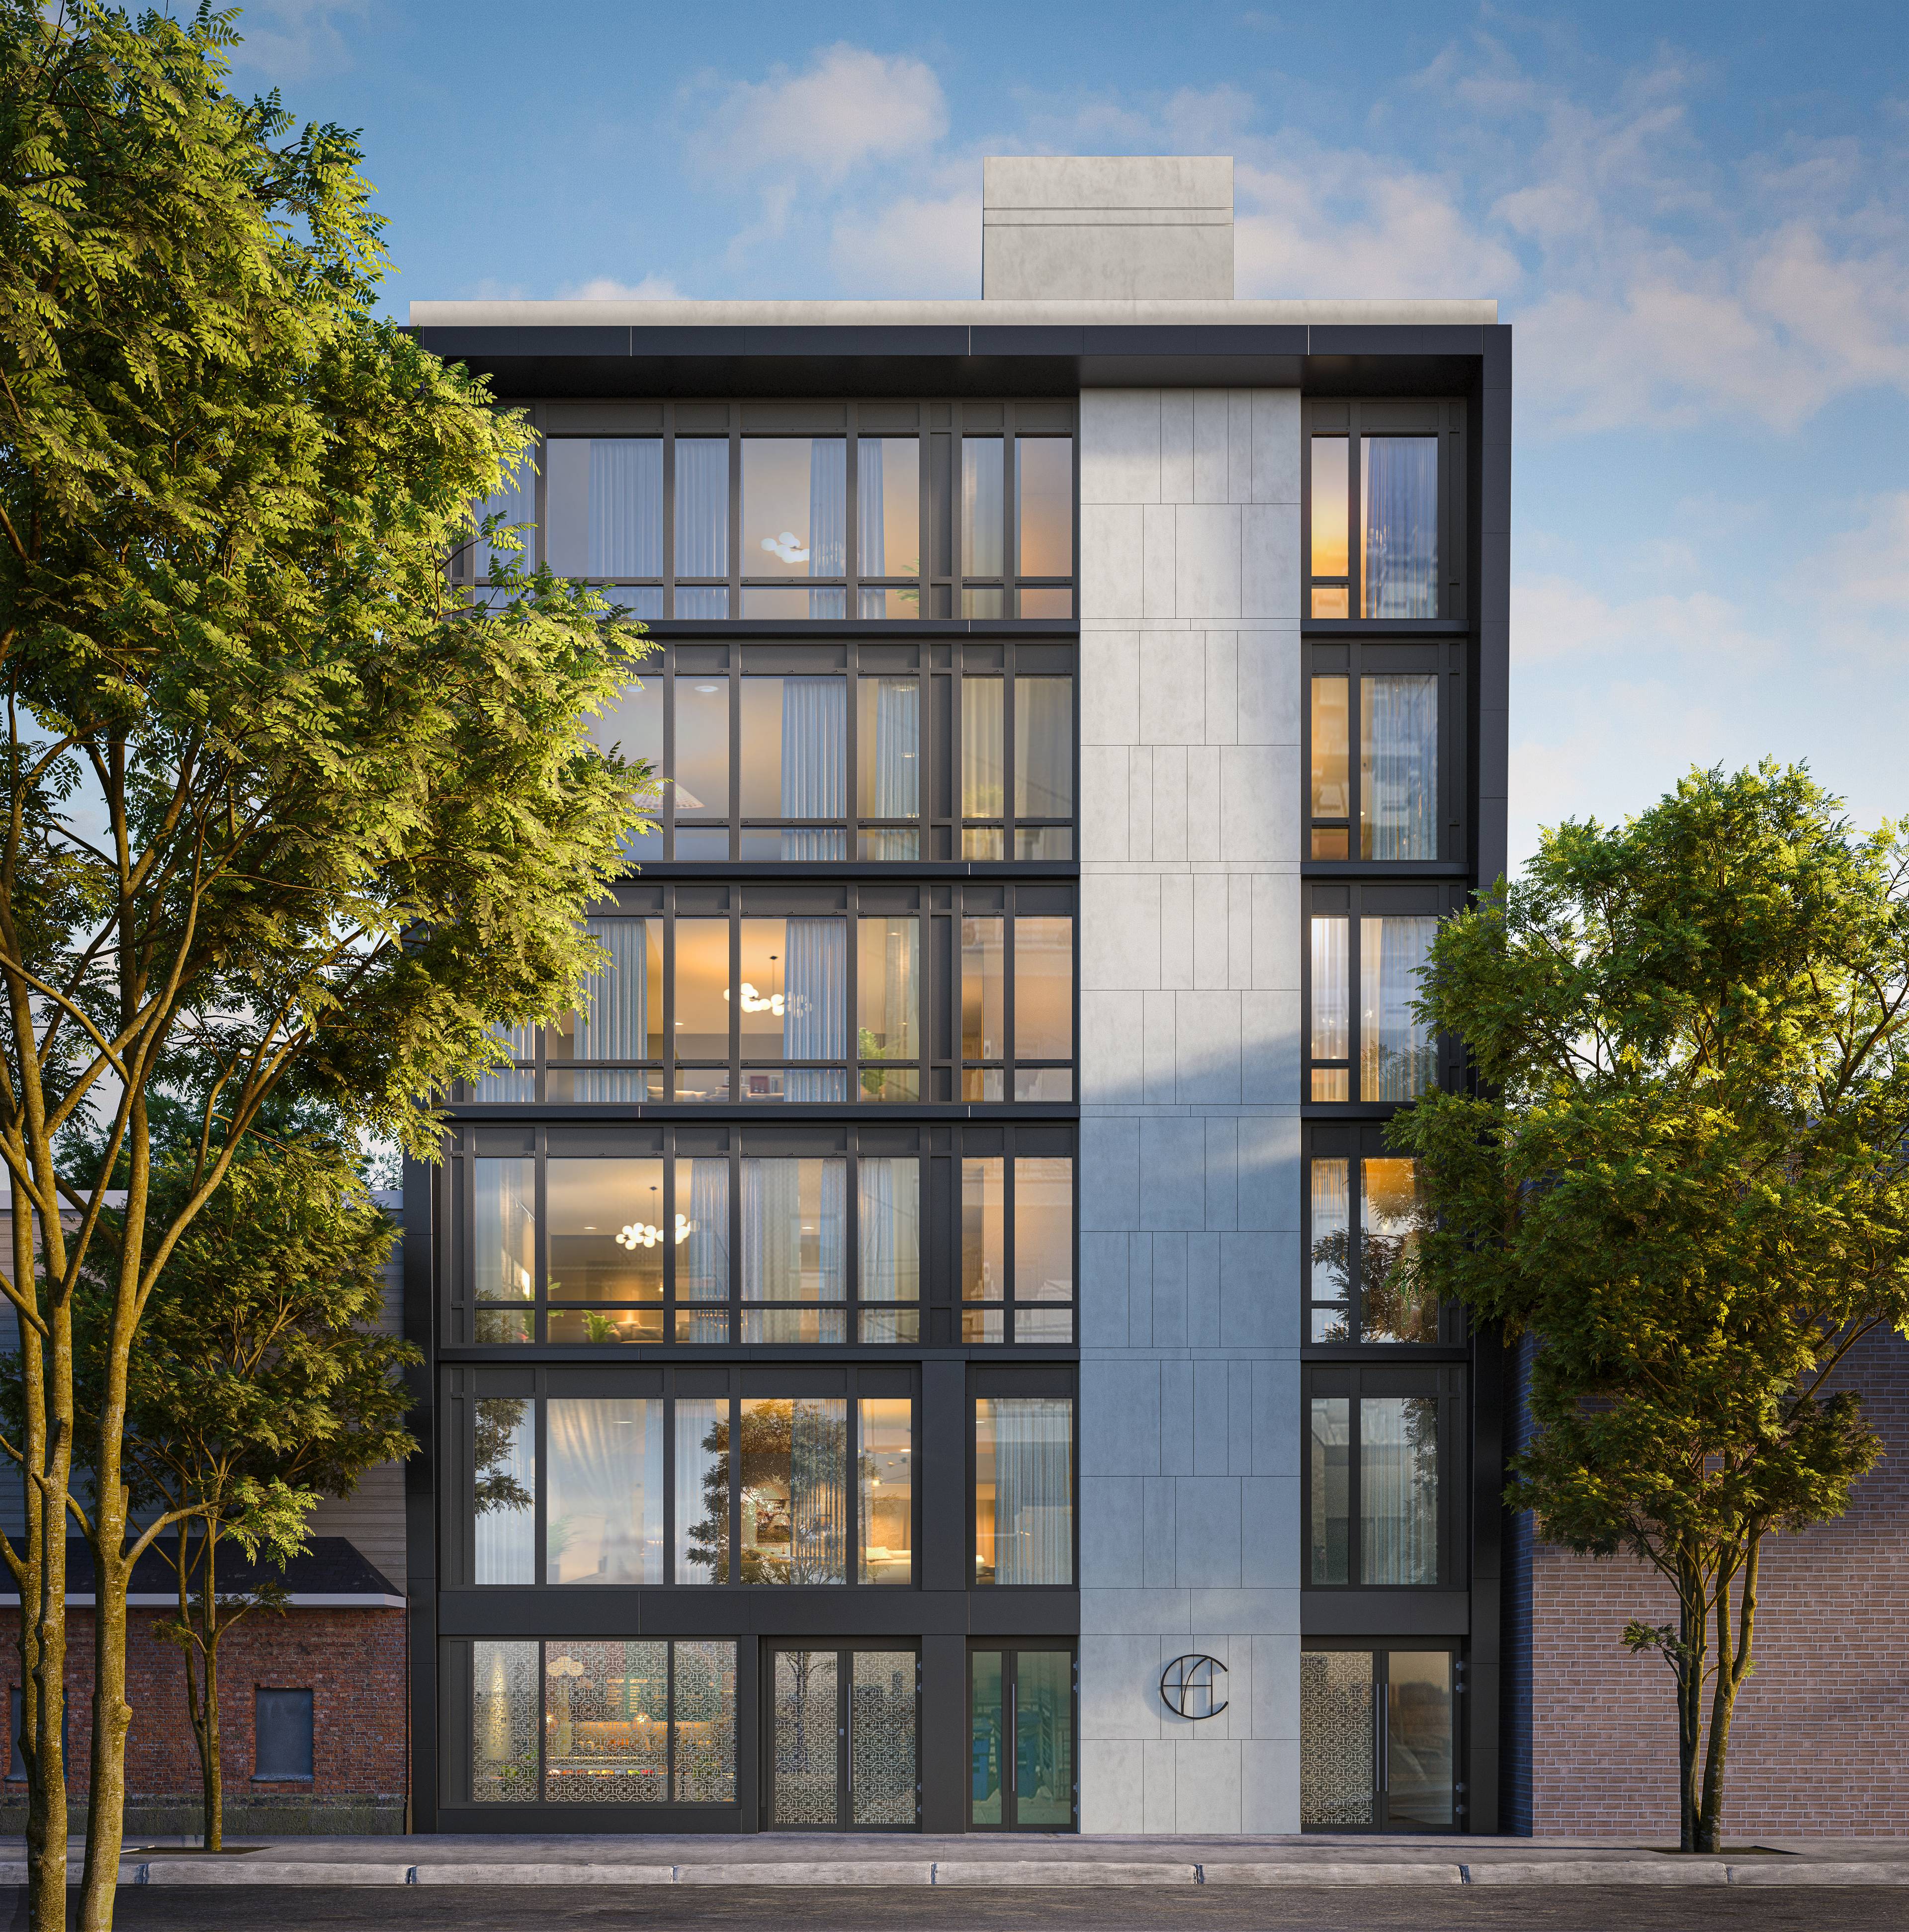 BRAND NEW LUXURY CONDO FOR RENT IN THE HEART OF NORTH WILLIAMSBURG | 29 HAVEMEYER